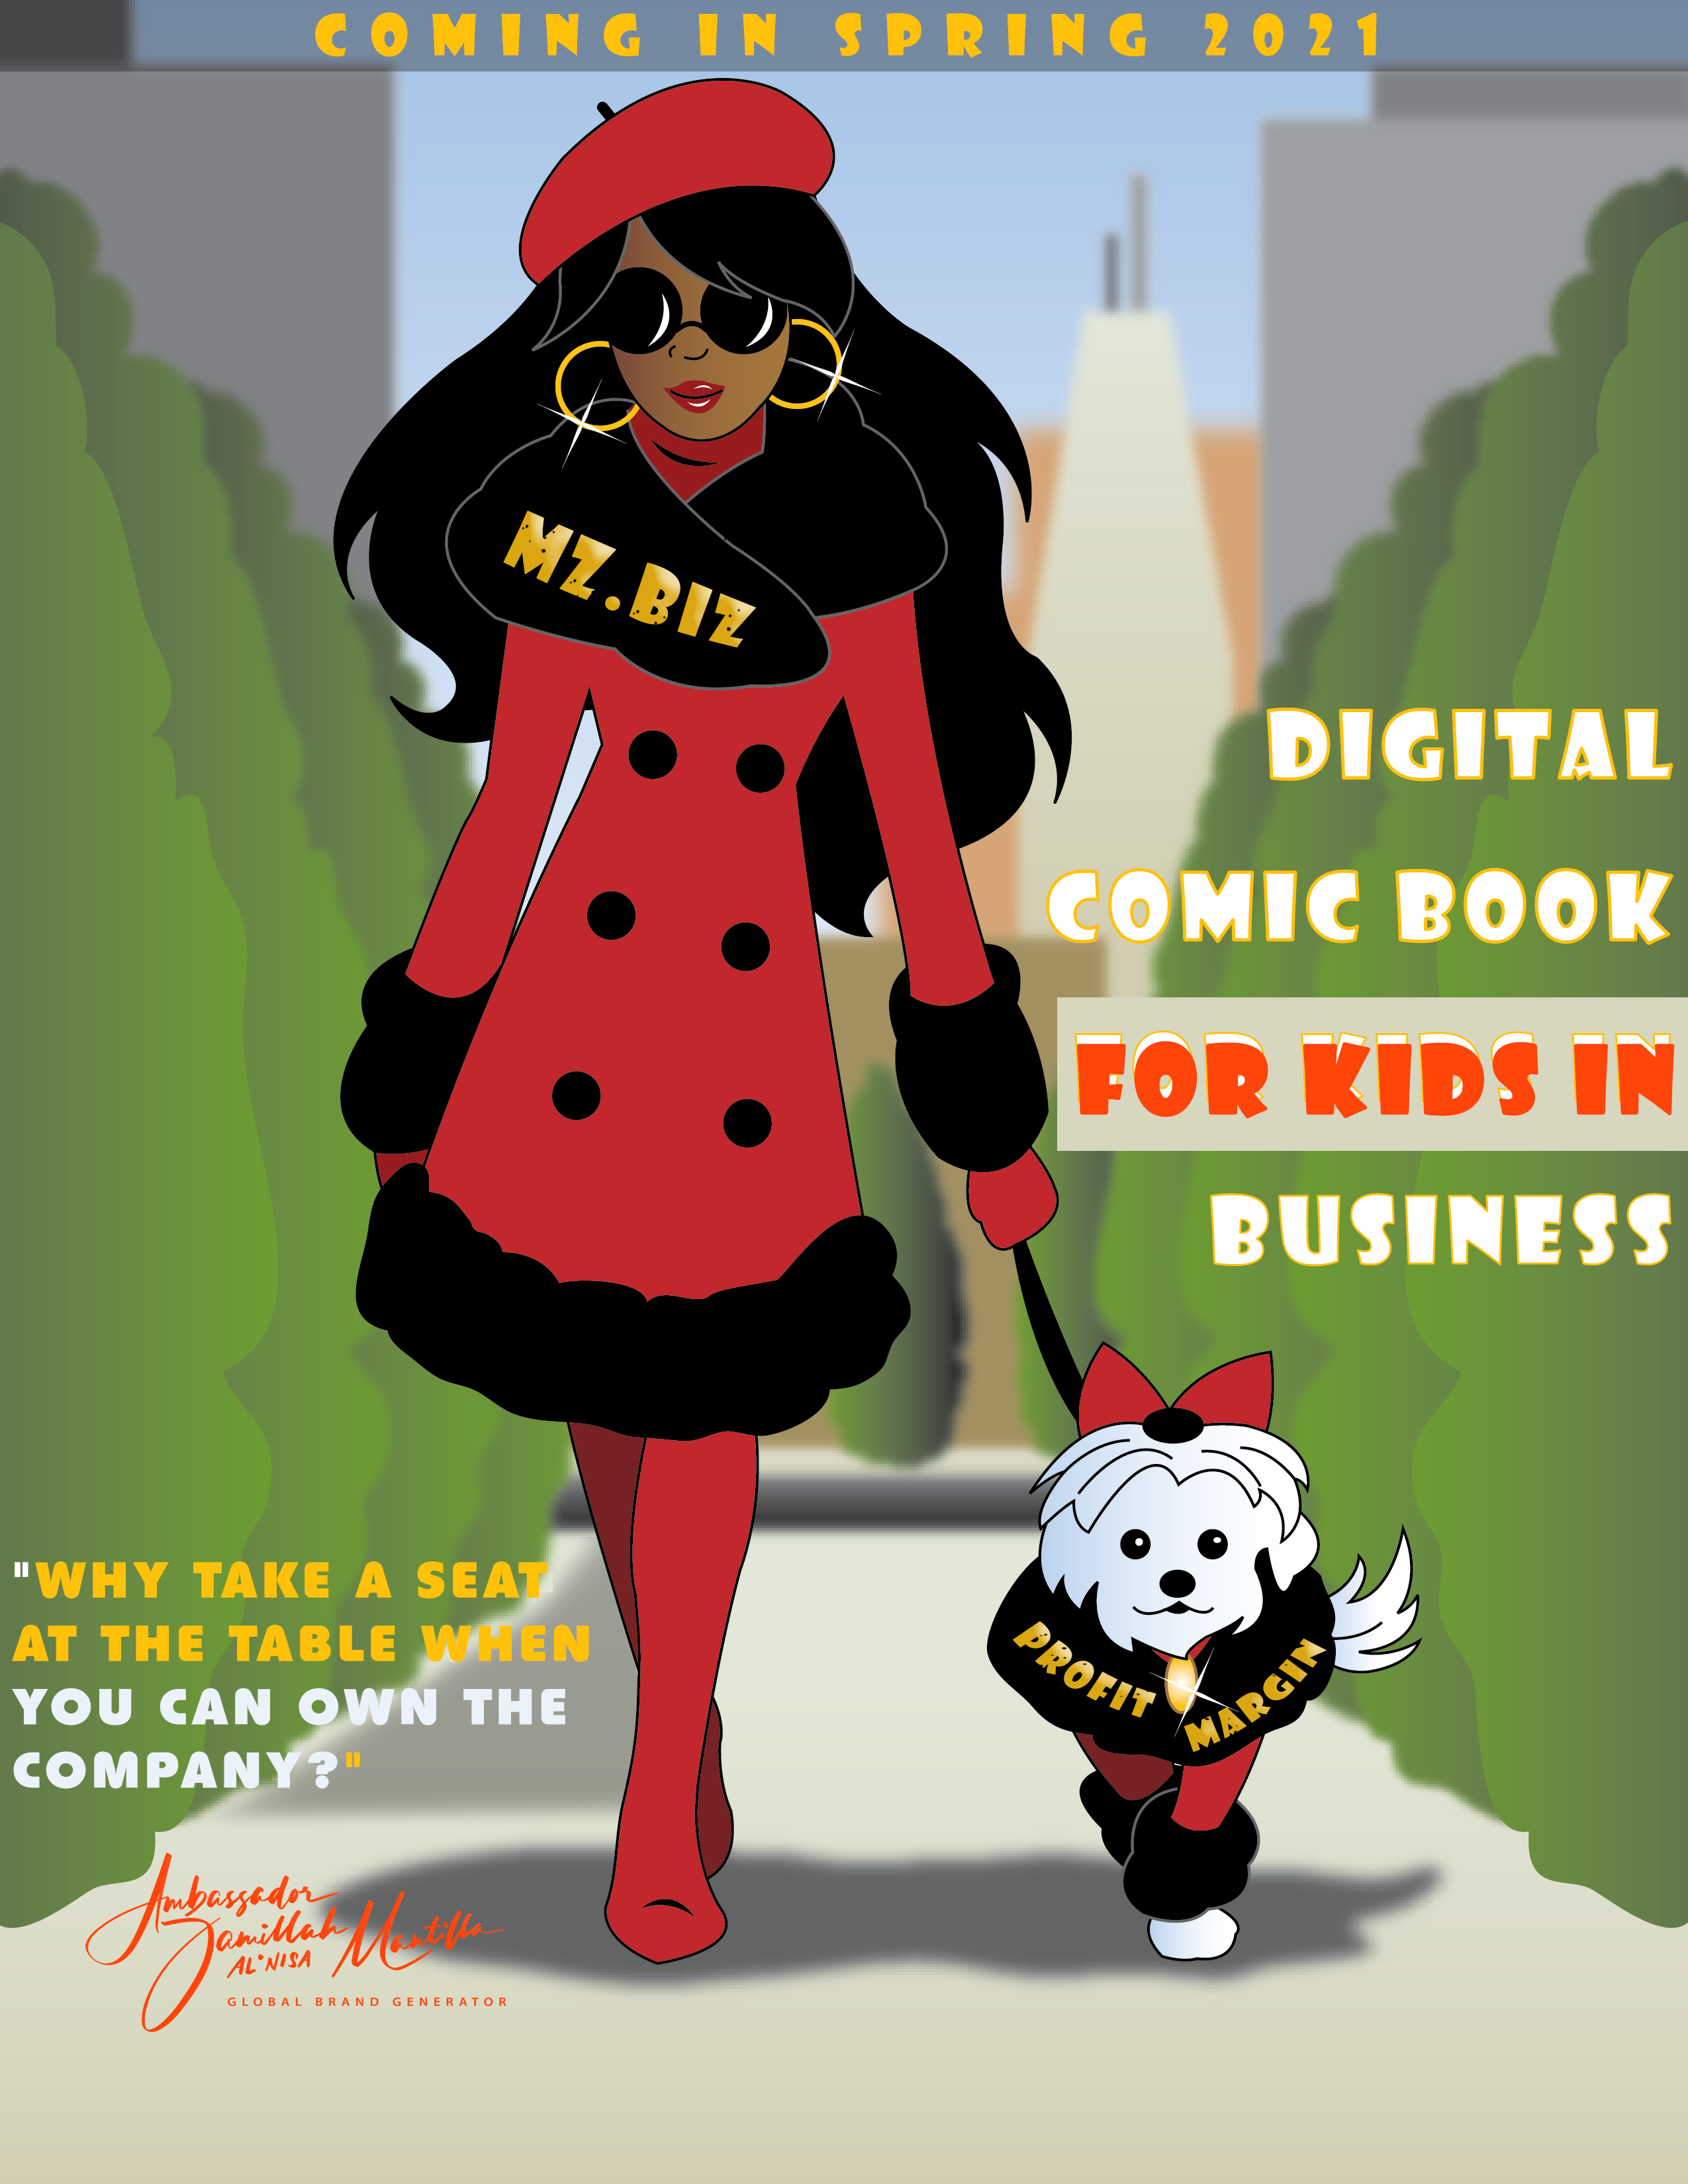 Comic book for kids